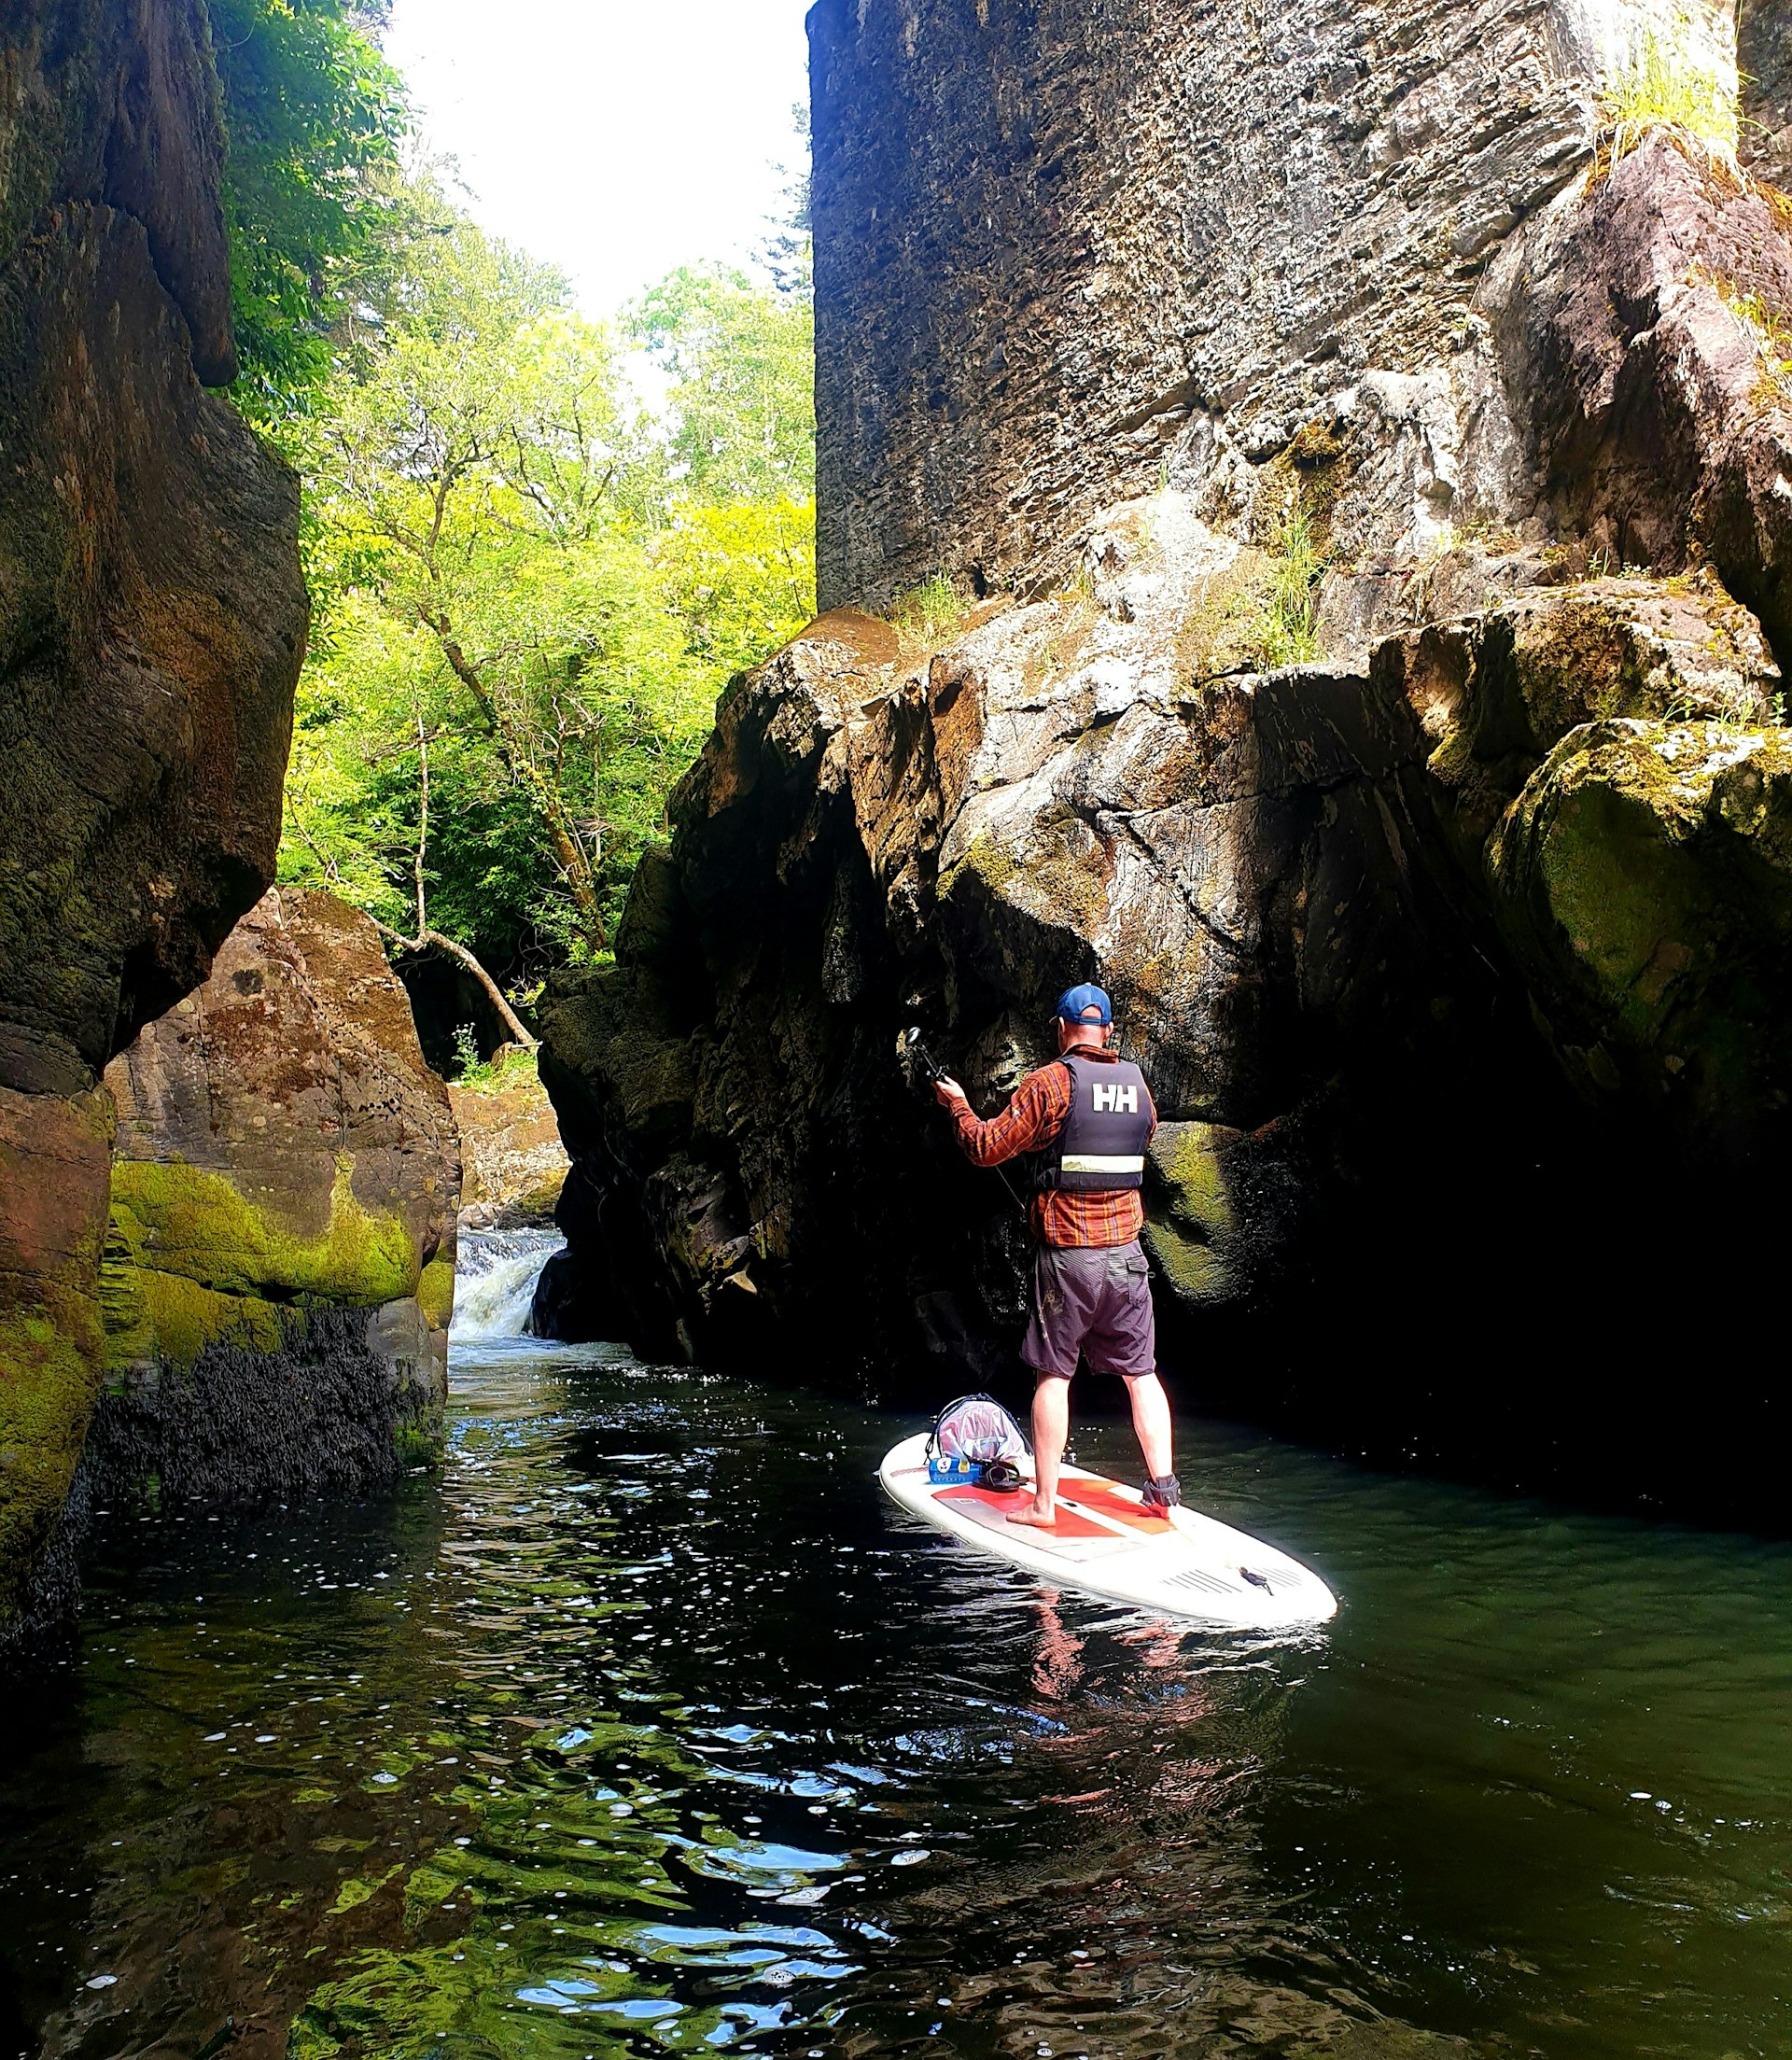 A paddler makes his way on a SUP between a small chasm between two rock walls; a forest looms on the other side.